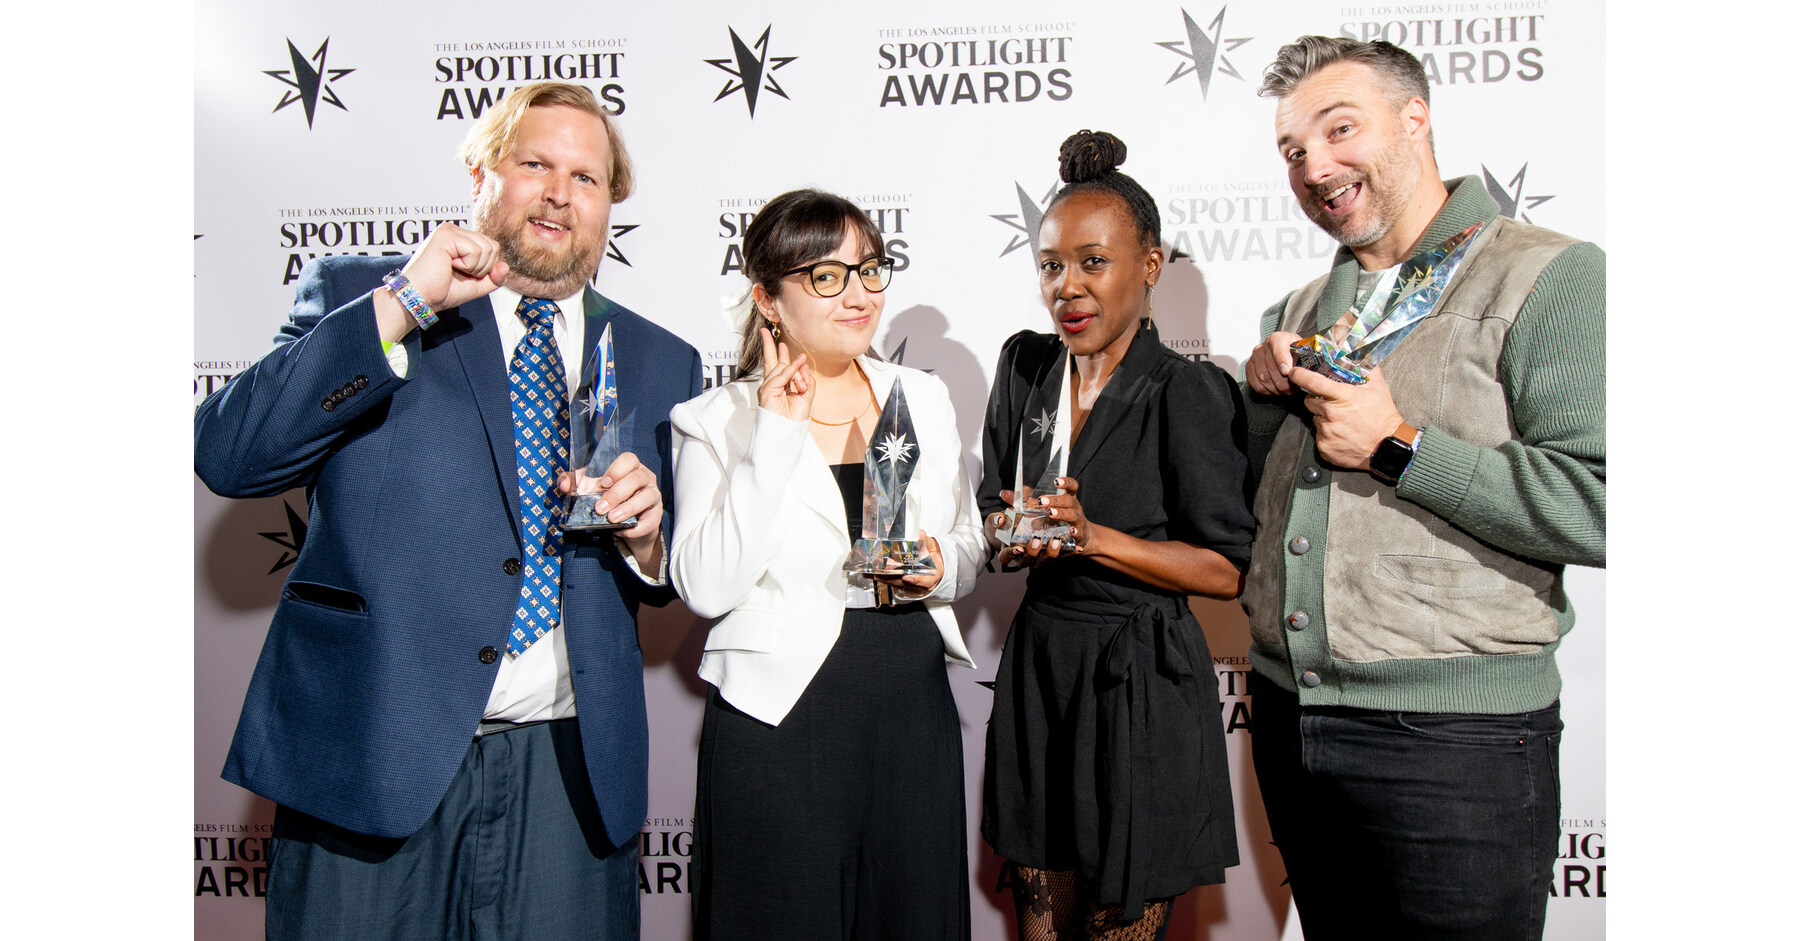 The Los Angeles Film School Presented Four Alumni With Spotlight Awards At Ivar Theatre